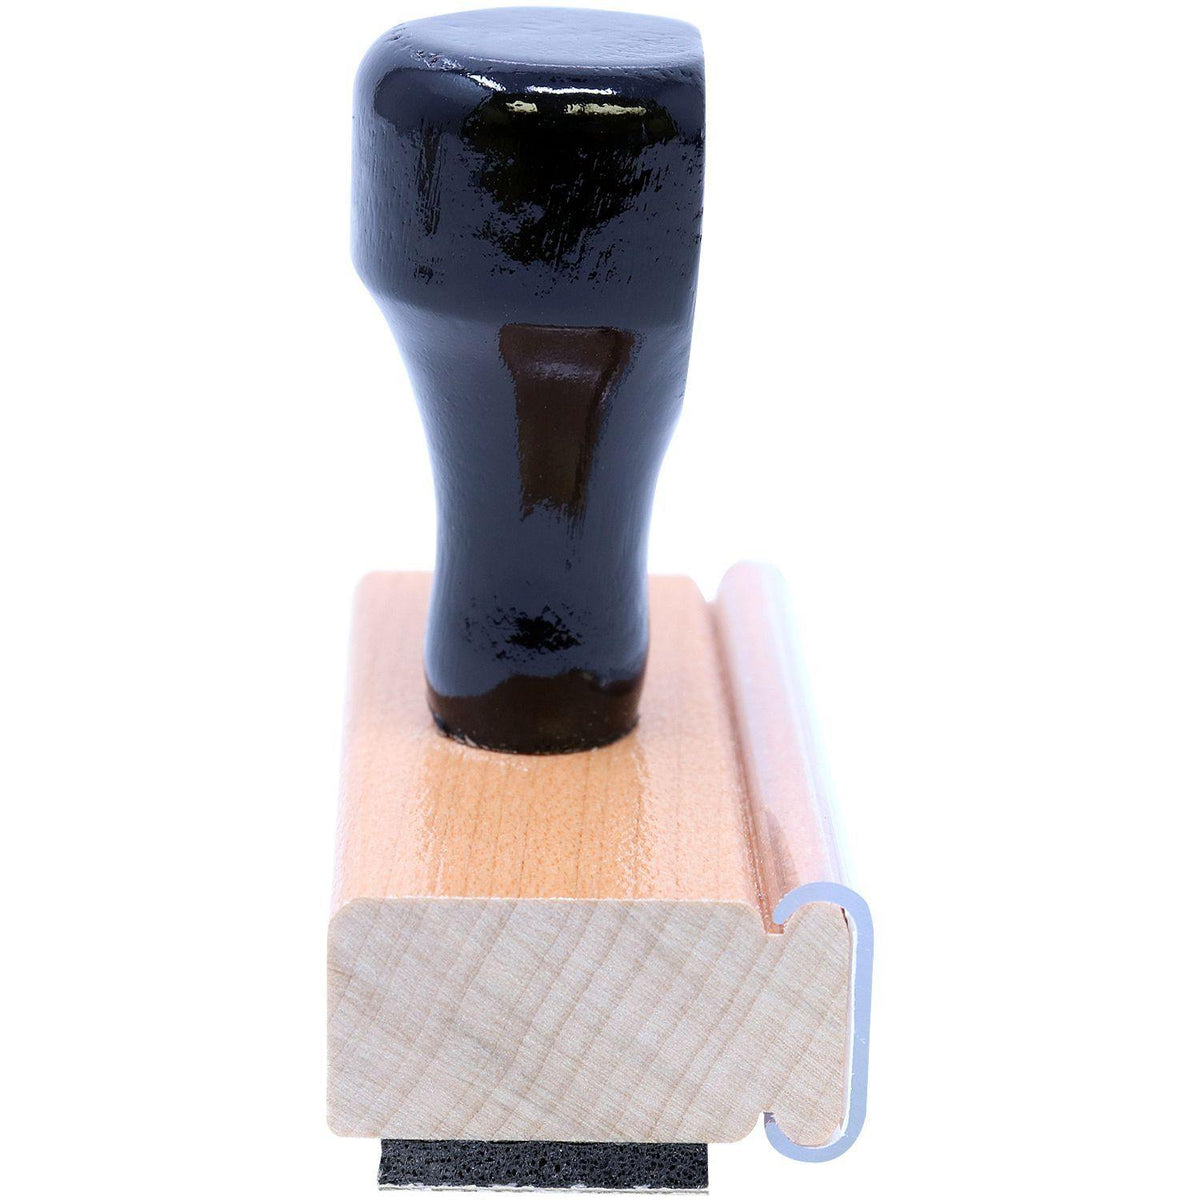 Make Up Work Rubber Stamp - Engineer Seal Stamps - Brand_Acorn, Impression Size_Small, Stamp Type_Regular Stamp, Type of Use_Teacher